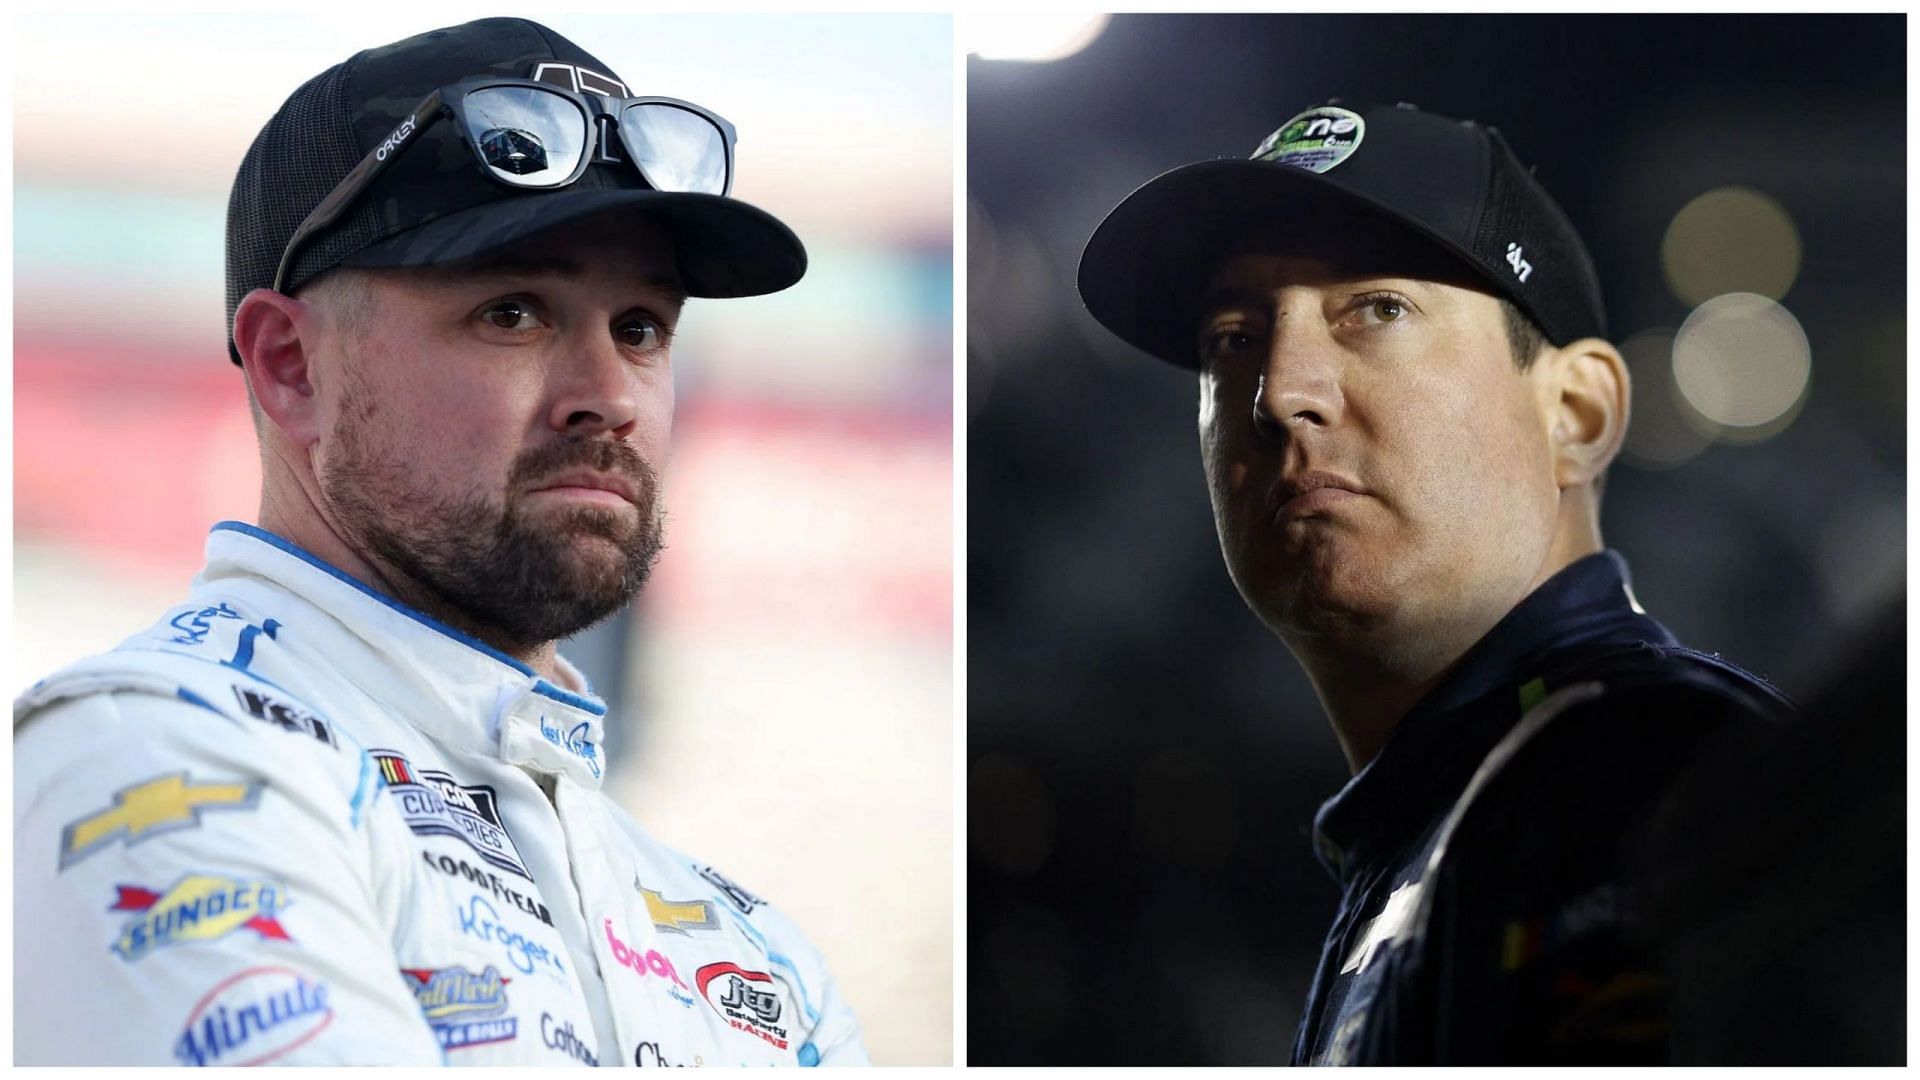 NASCAR VP explains the penalty on Ricky Stenhouse Jr for incident with Kyle Busch